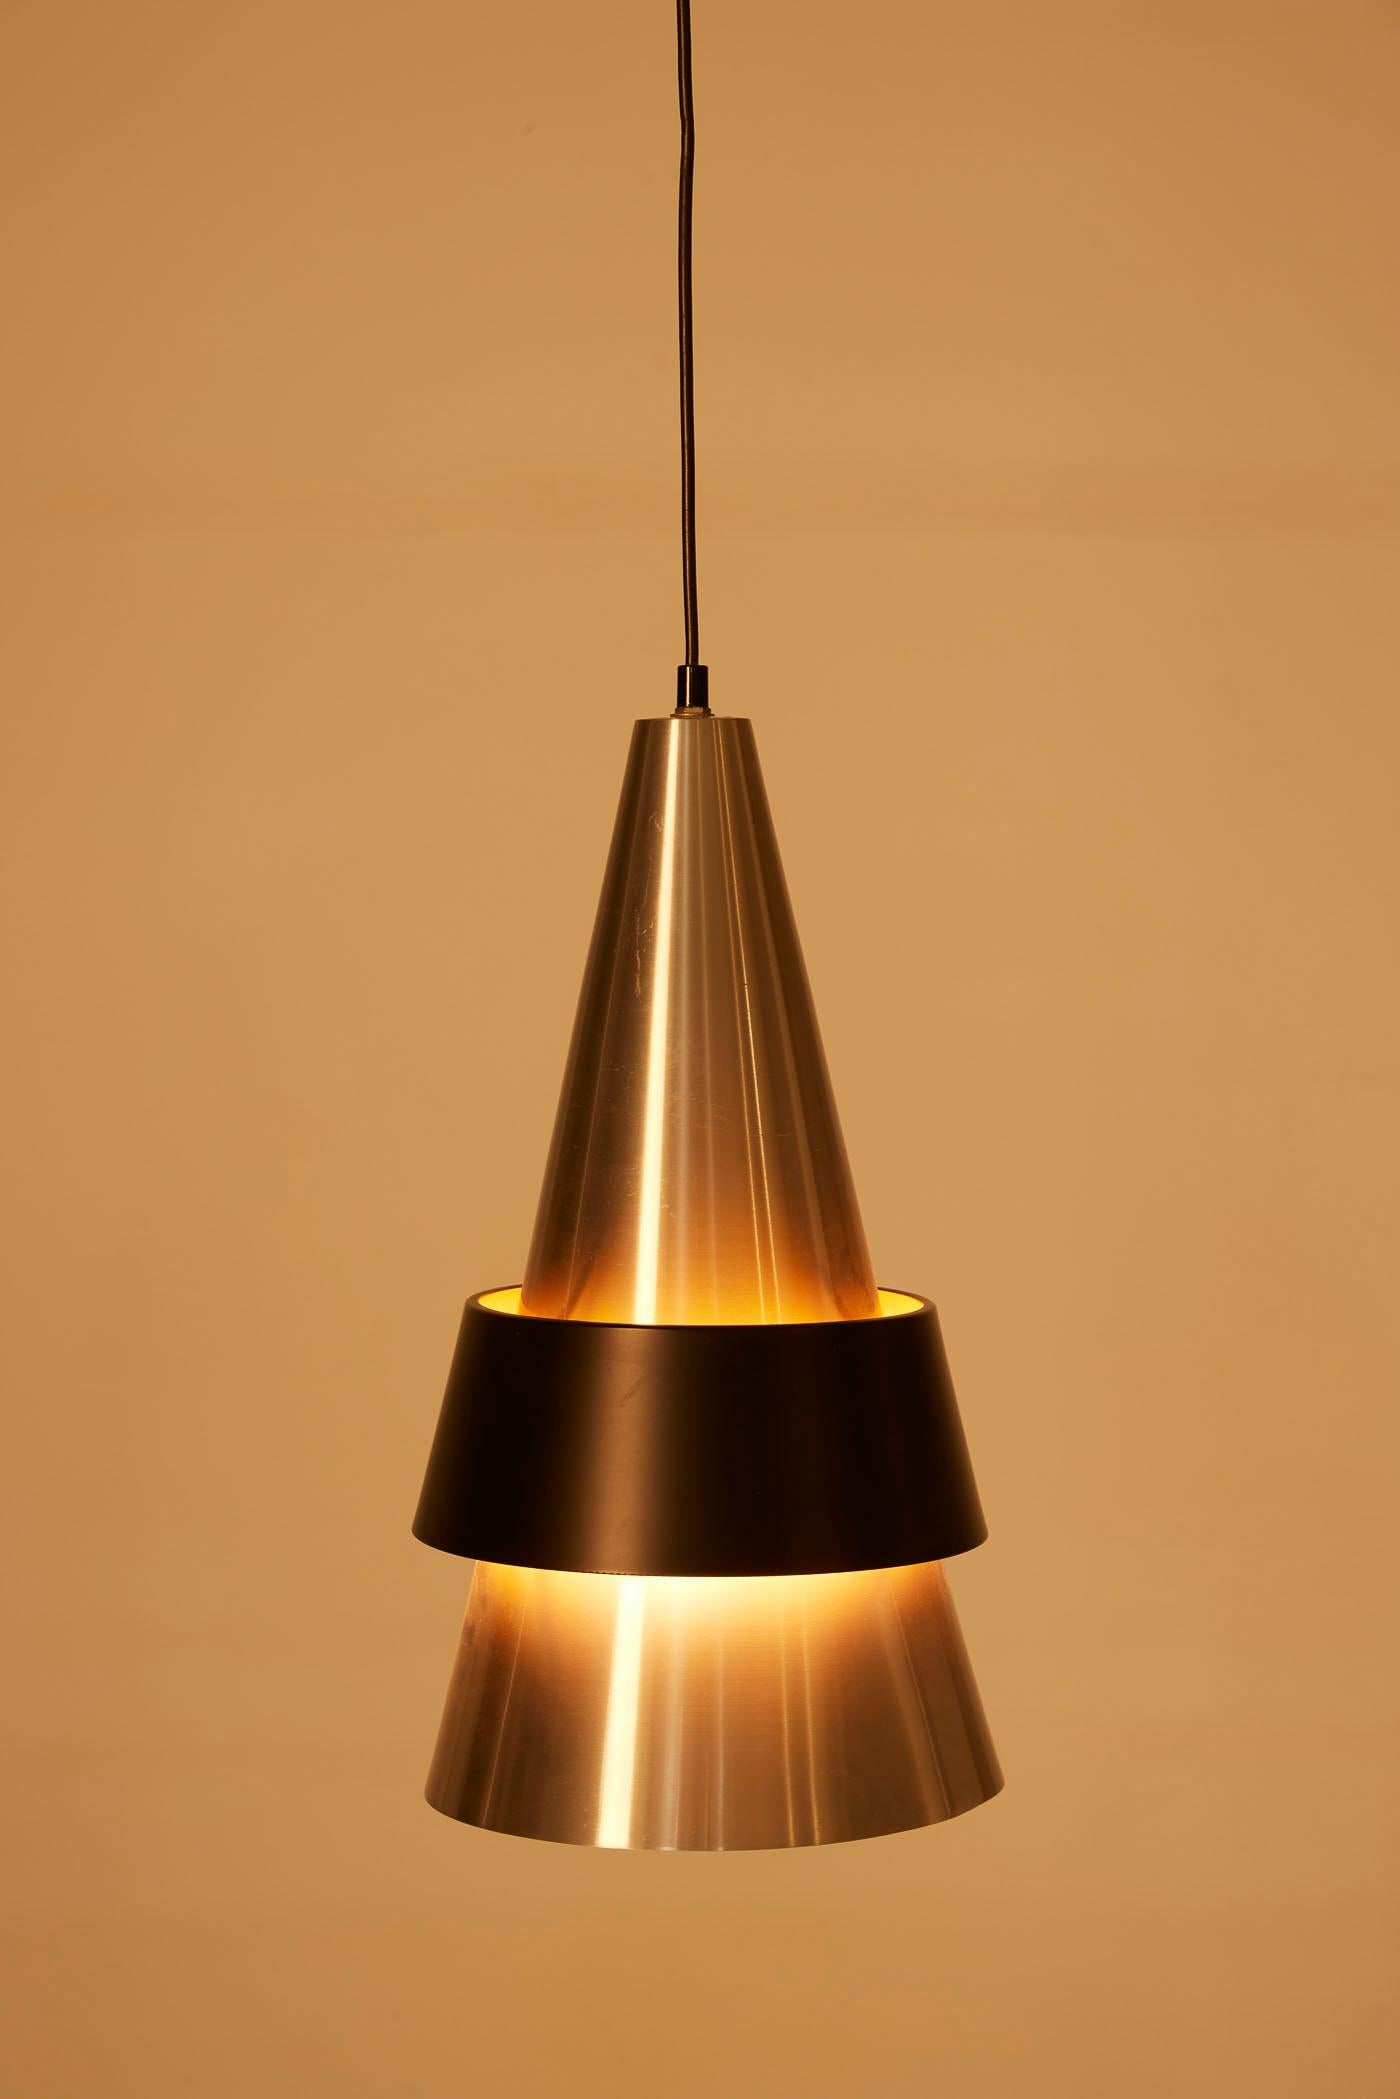 Corona pendant light by Danish designer Jo Hammerborg for Fog & Mørup, from the 1960s. The conical reflector is made of brushed metal with a black lacquered metal ring. Very good condition.
DV429